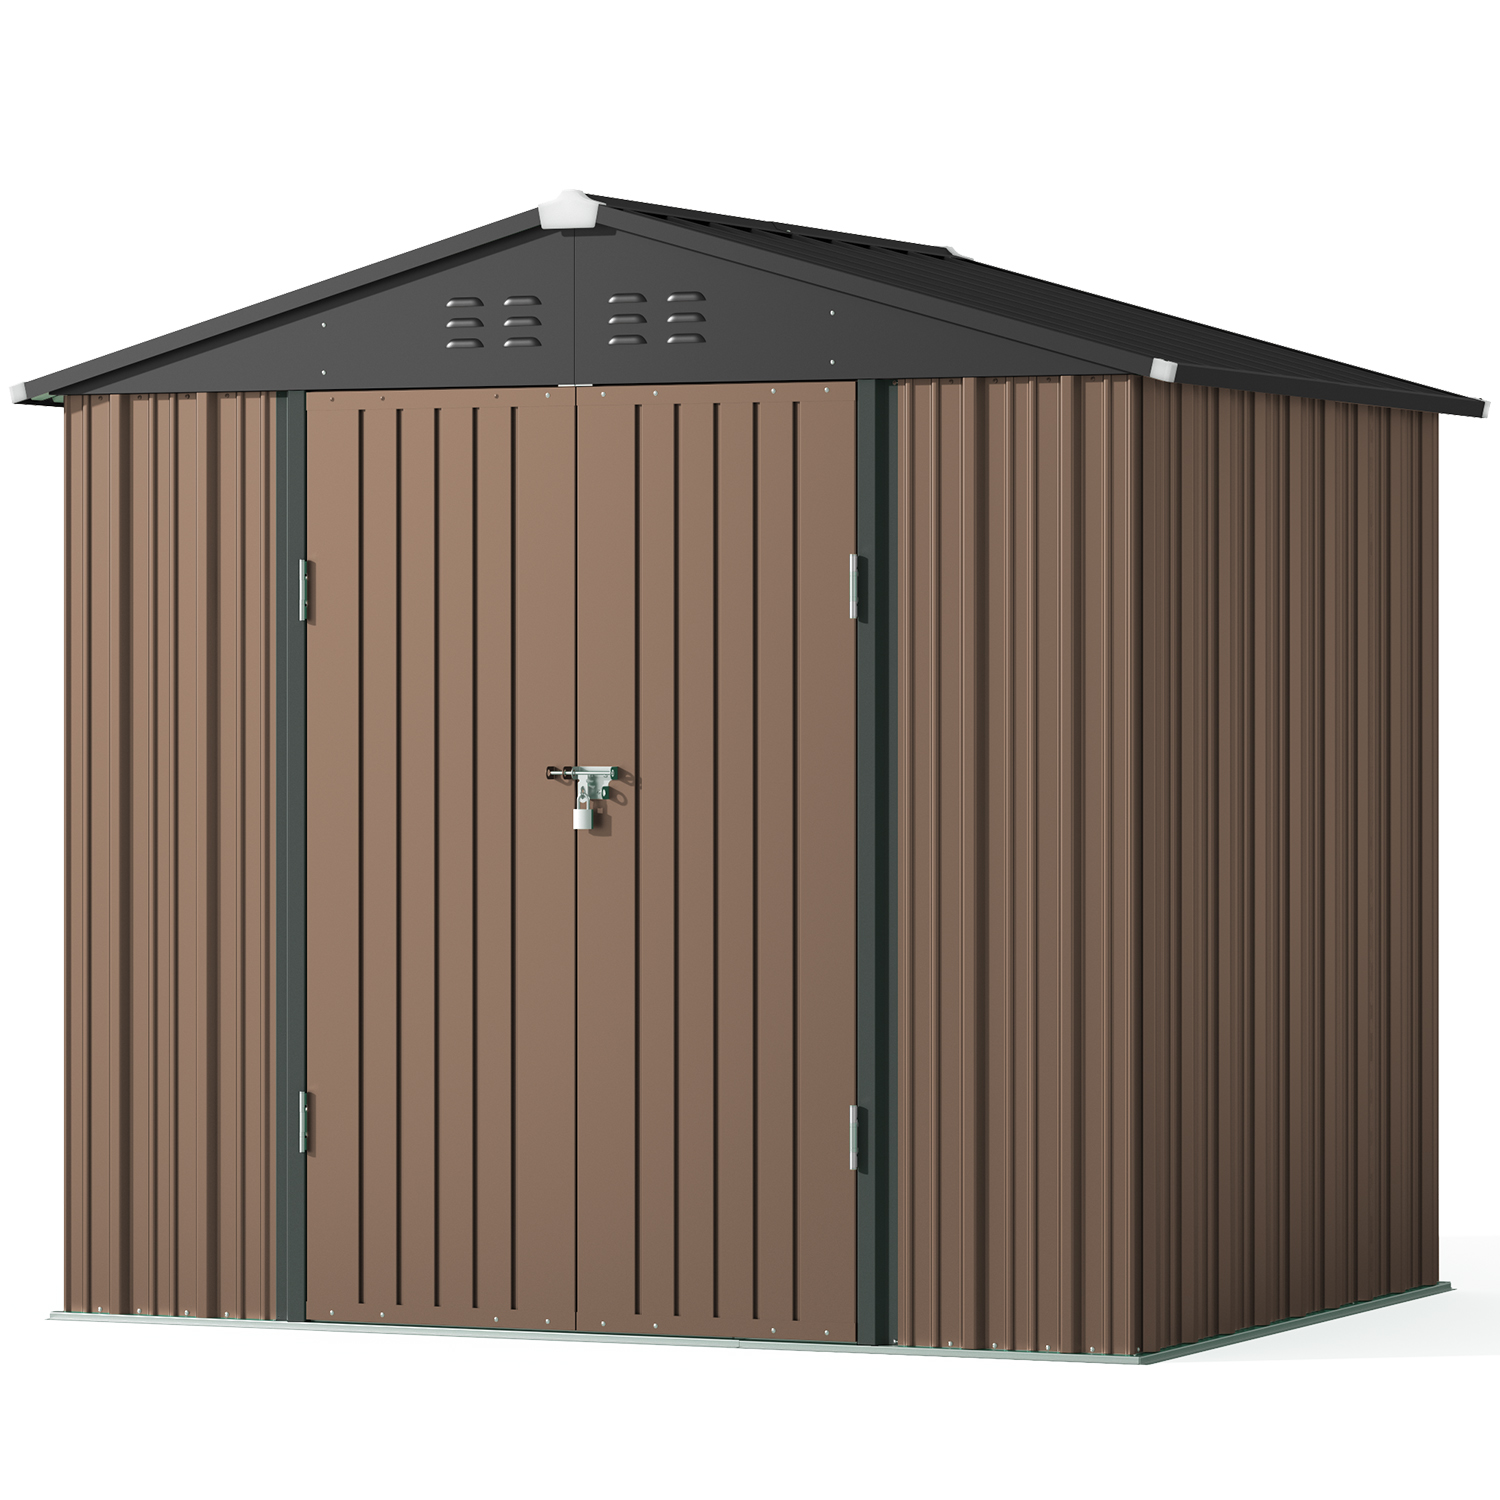 Lofka Outdoor Storage Shed with Double Lockable Doors, 8x6" Metal Garden Shed with Transparent Panel Windows for Patio & Lawn, Brown - image 1 of 8